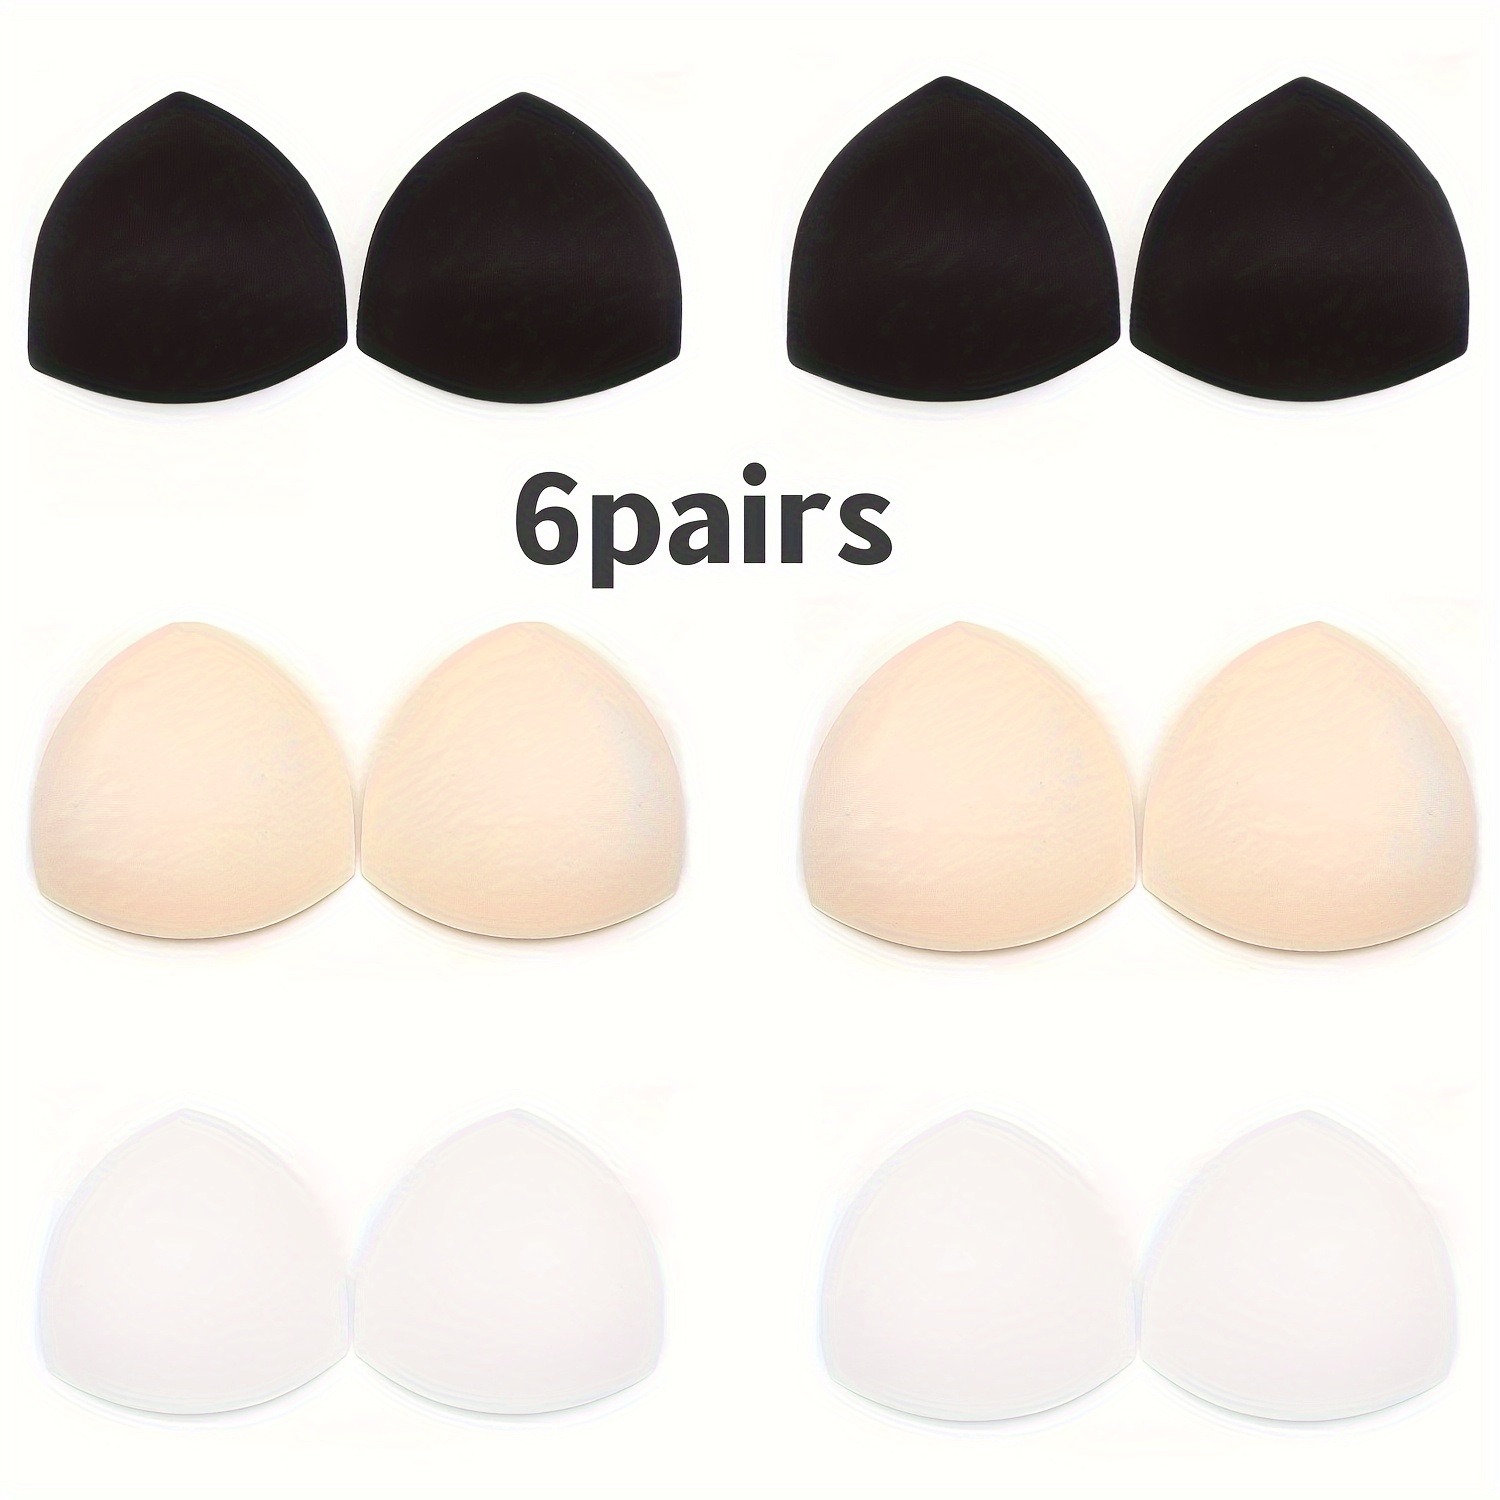 

6 Pairs Triangle Bra Pads, Seamless Sponge Inserts For Sports Bras, High-quality Lingerie Accessories, Breast Pads